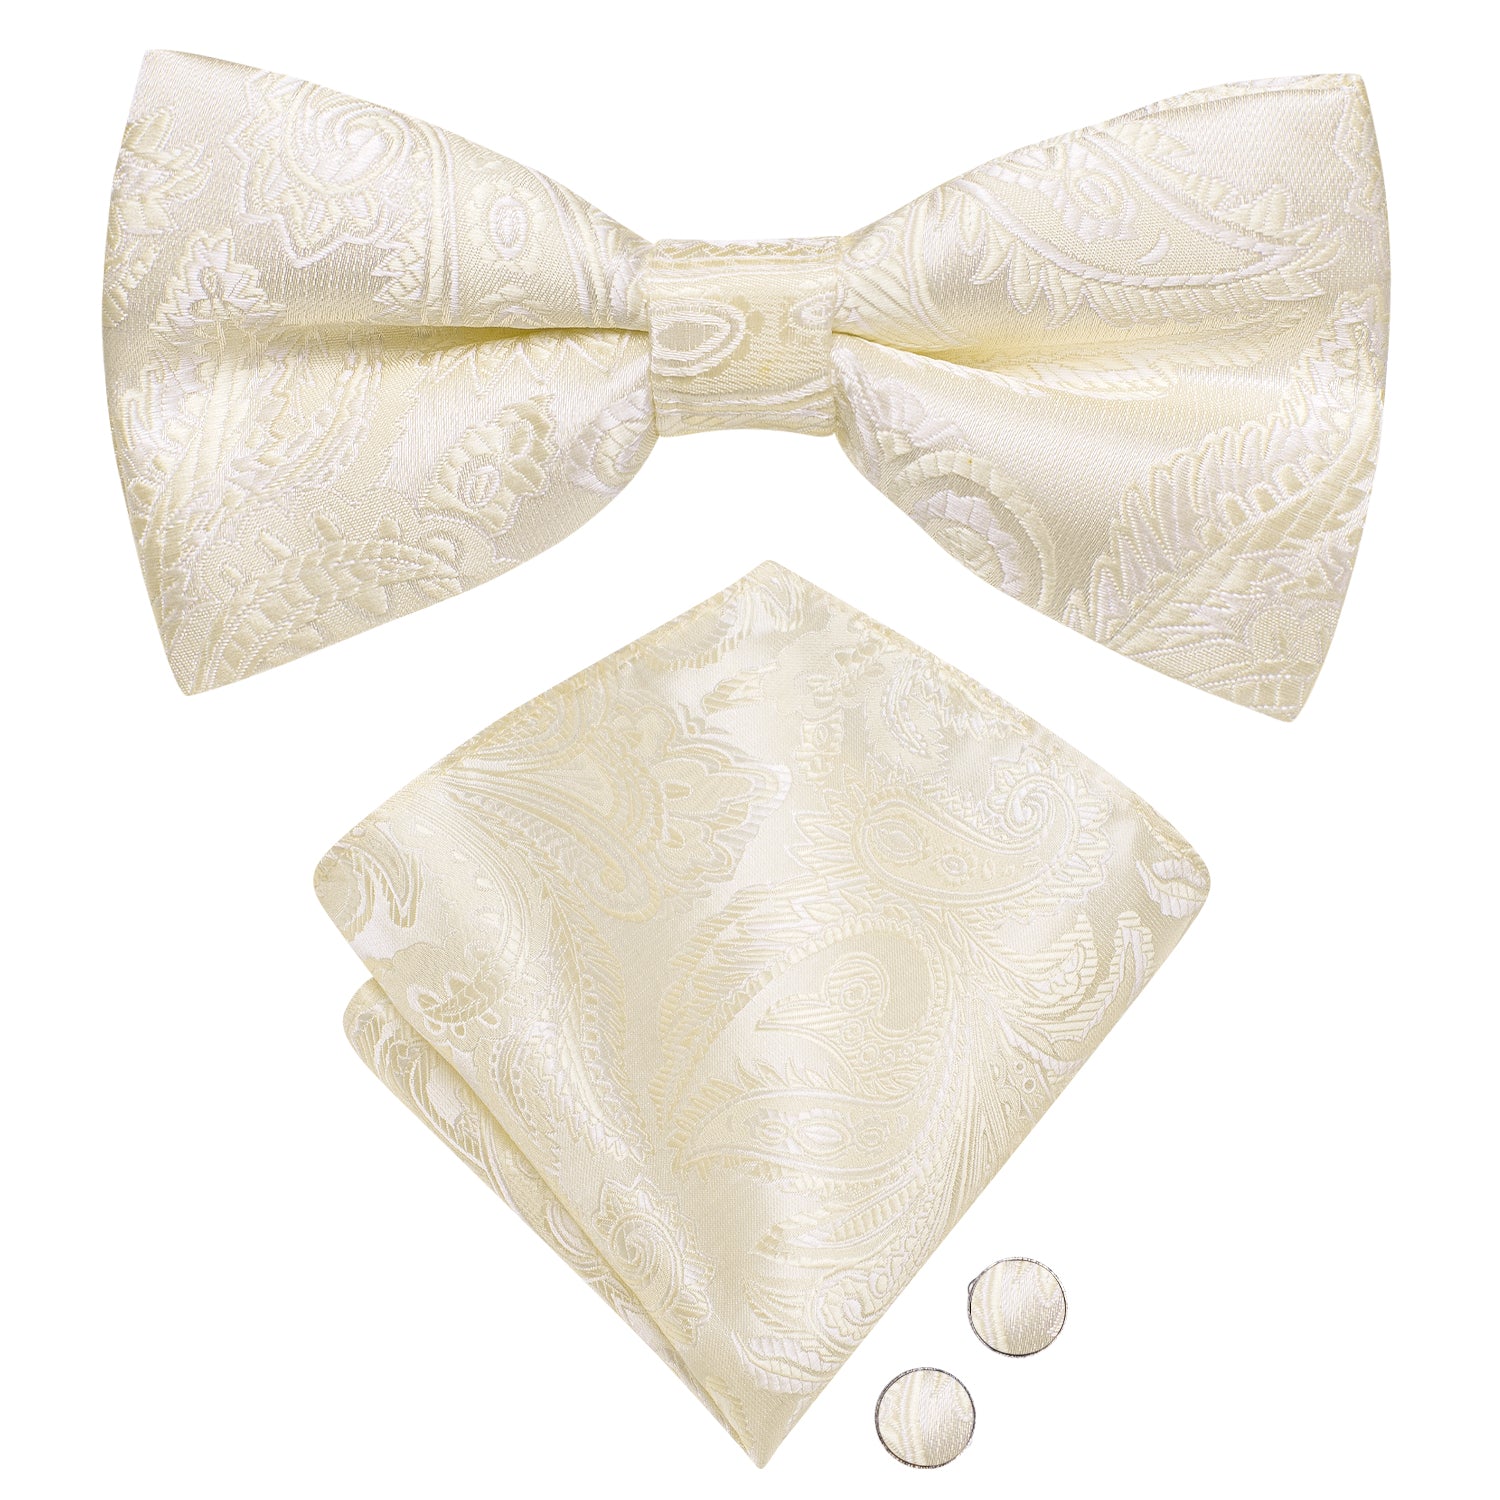 Champagne White Paisley Pre-tied Bow Tie Hanky Cufflinks Set